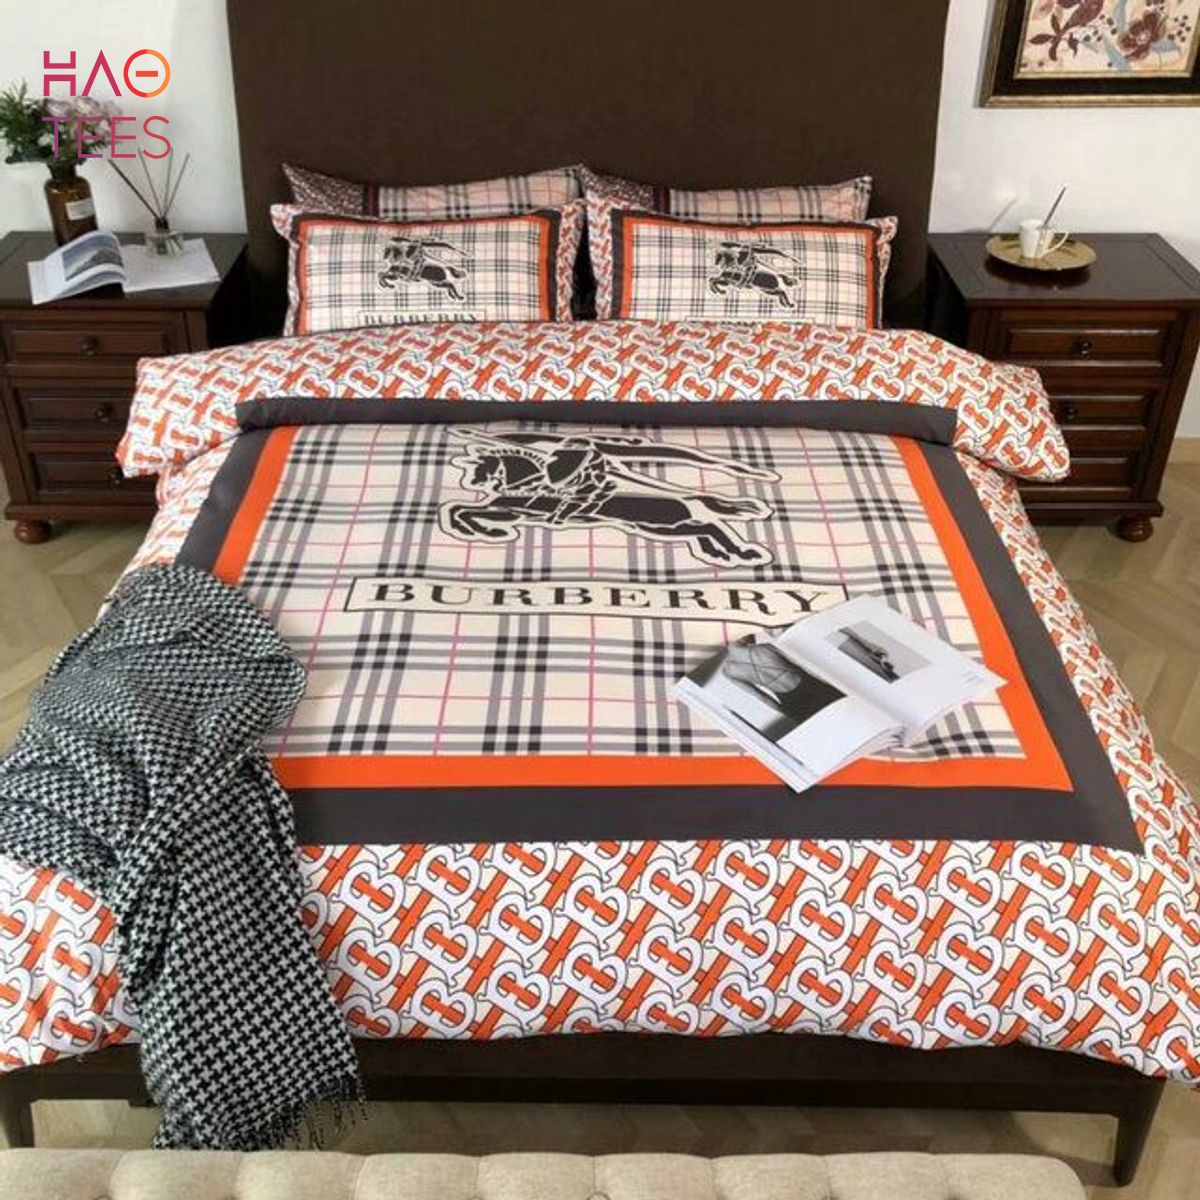 NEW Burberry London Bedding Sets And Bedroom Sets